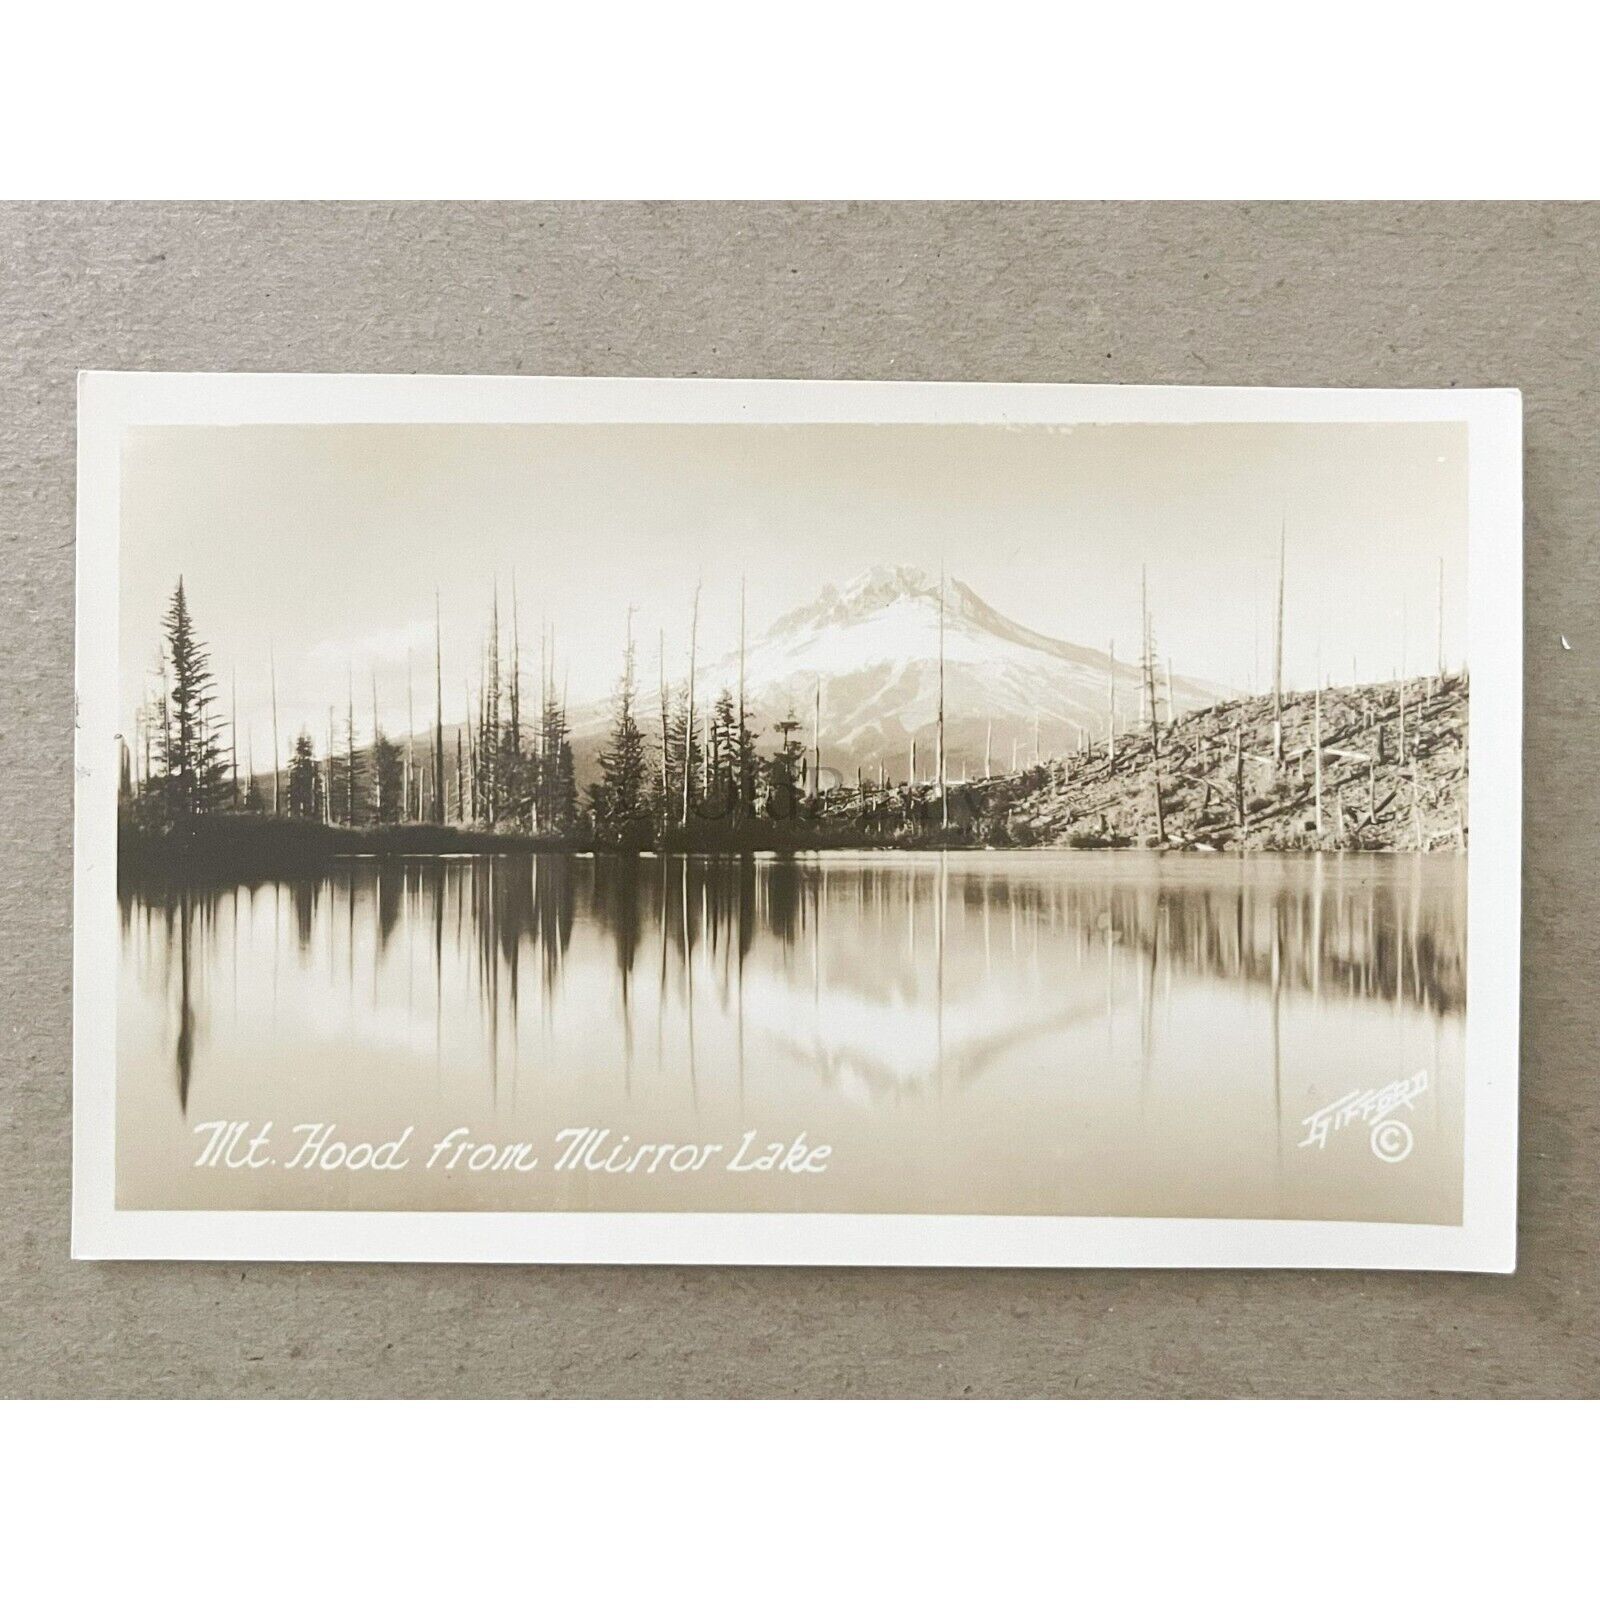 Vintage 1920s Mt. Hood from Near Parkdale Oregon Photo Benjamin A. Gifford